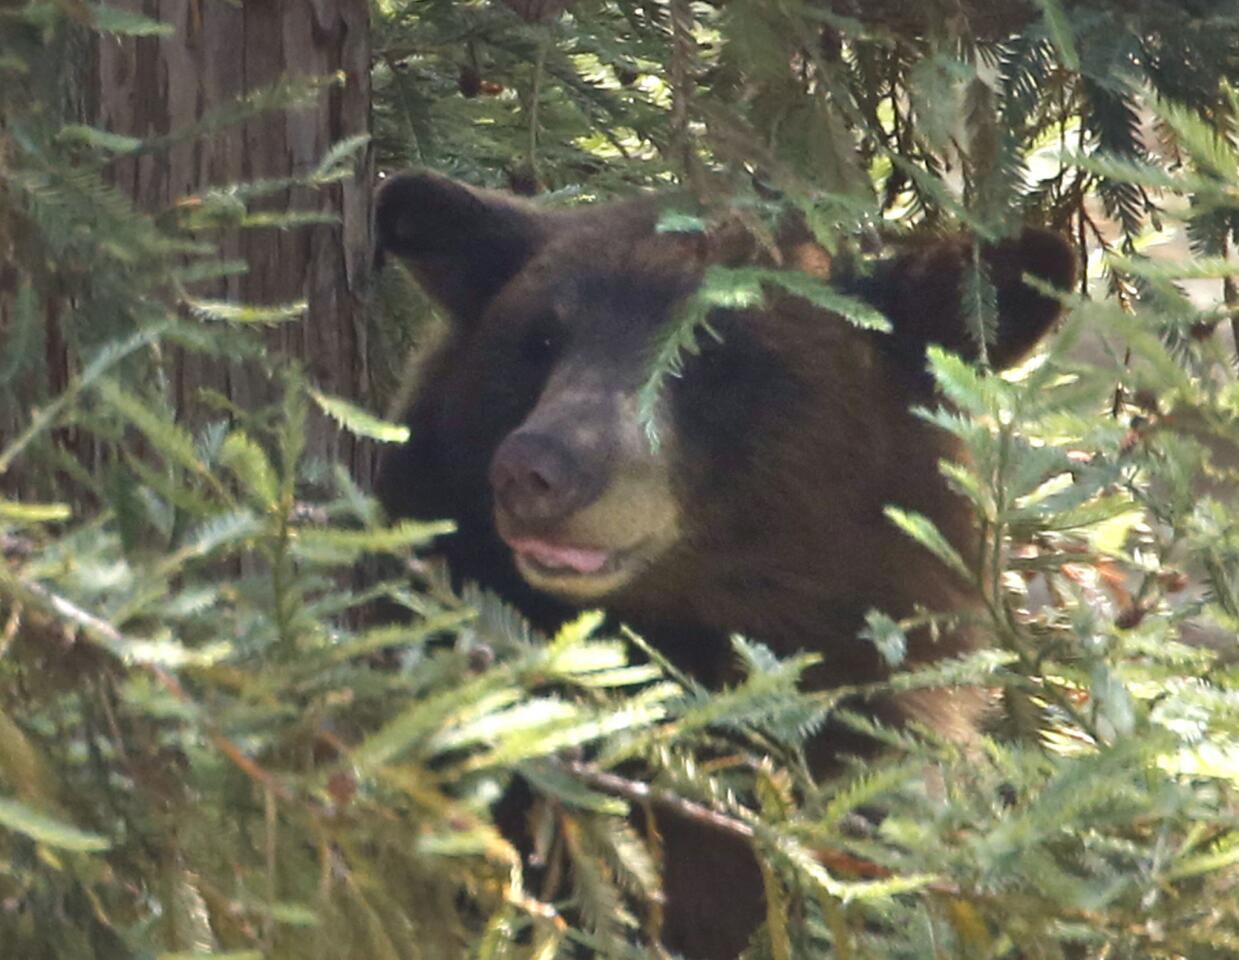 The bear rests in a pine tree on Jarvis Avenue.